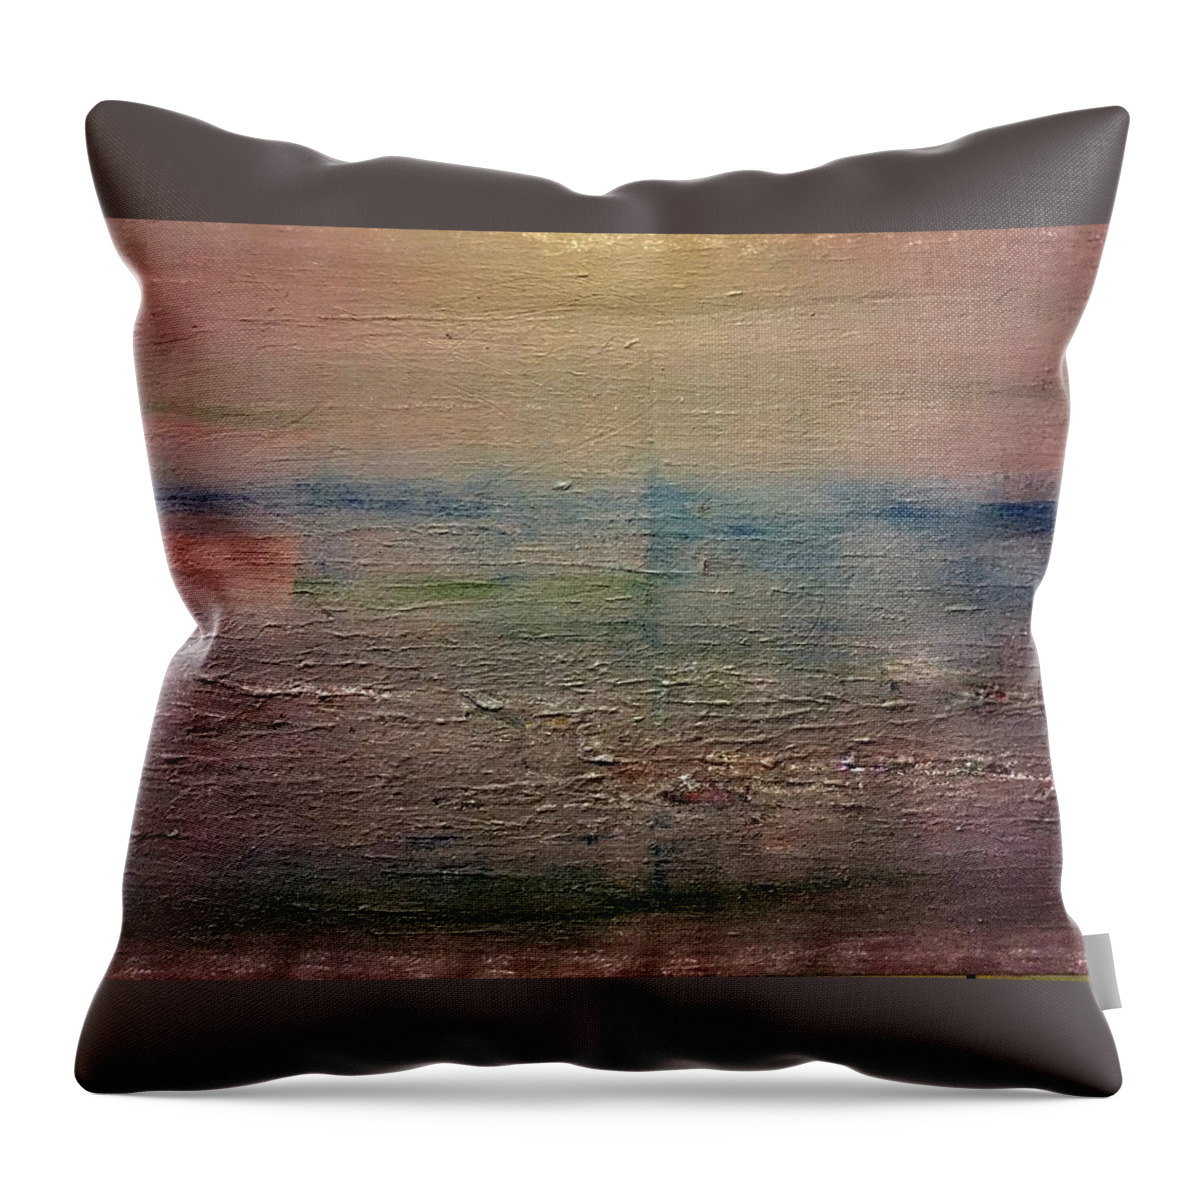  Throw Pillow featuring the painting Summer Haze by Greg Powell